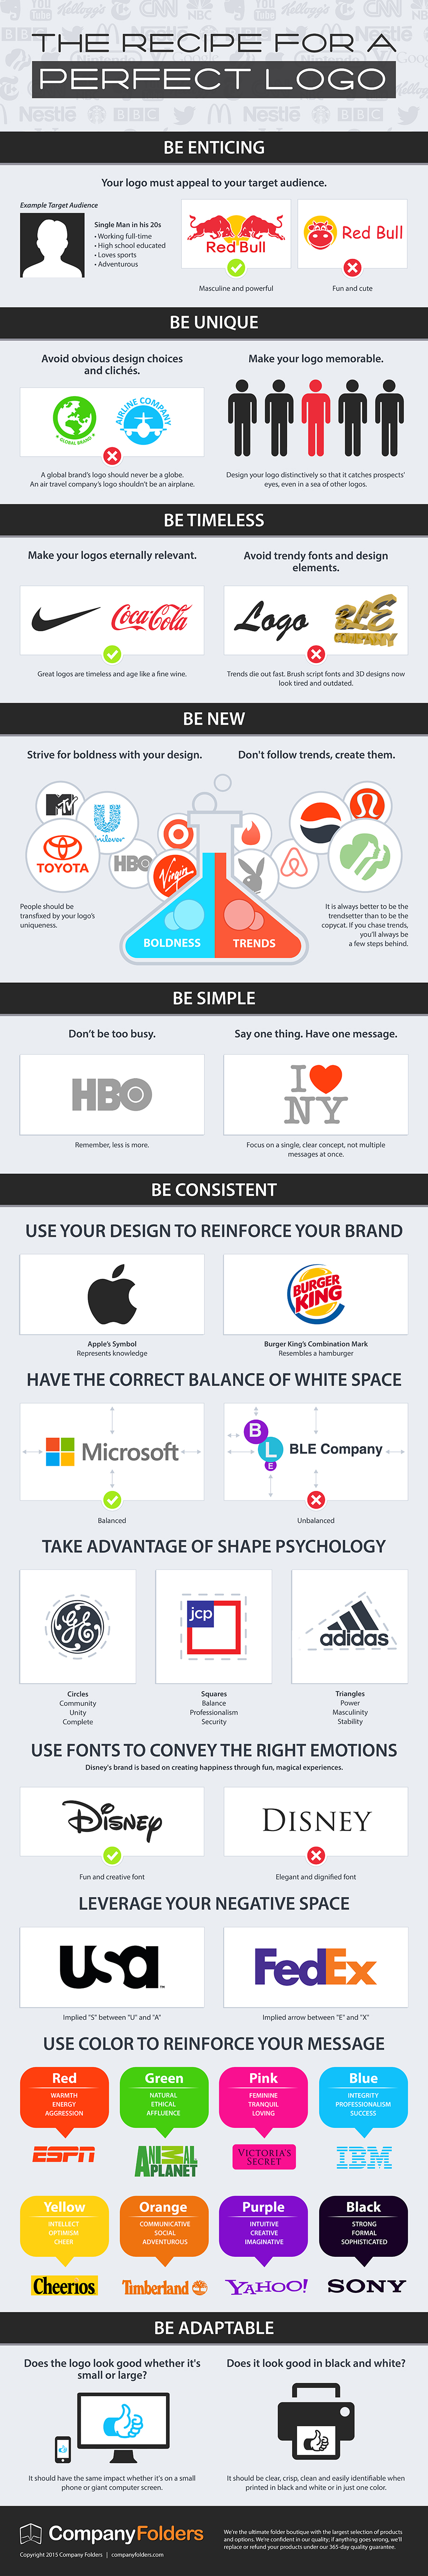 How to Design the Perfect Logo